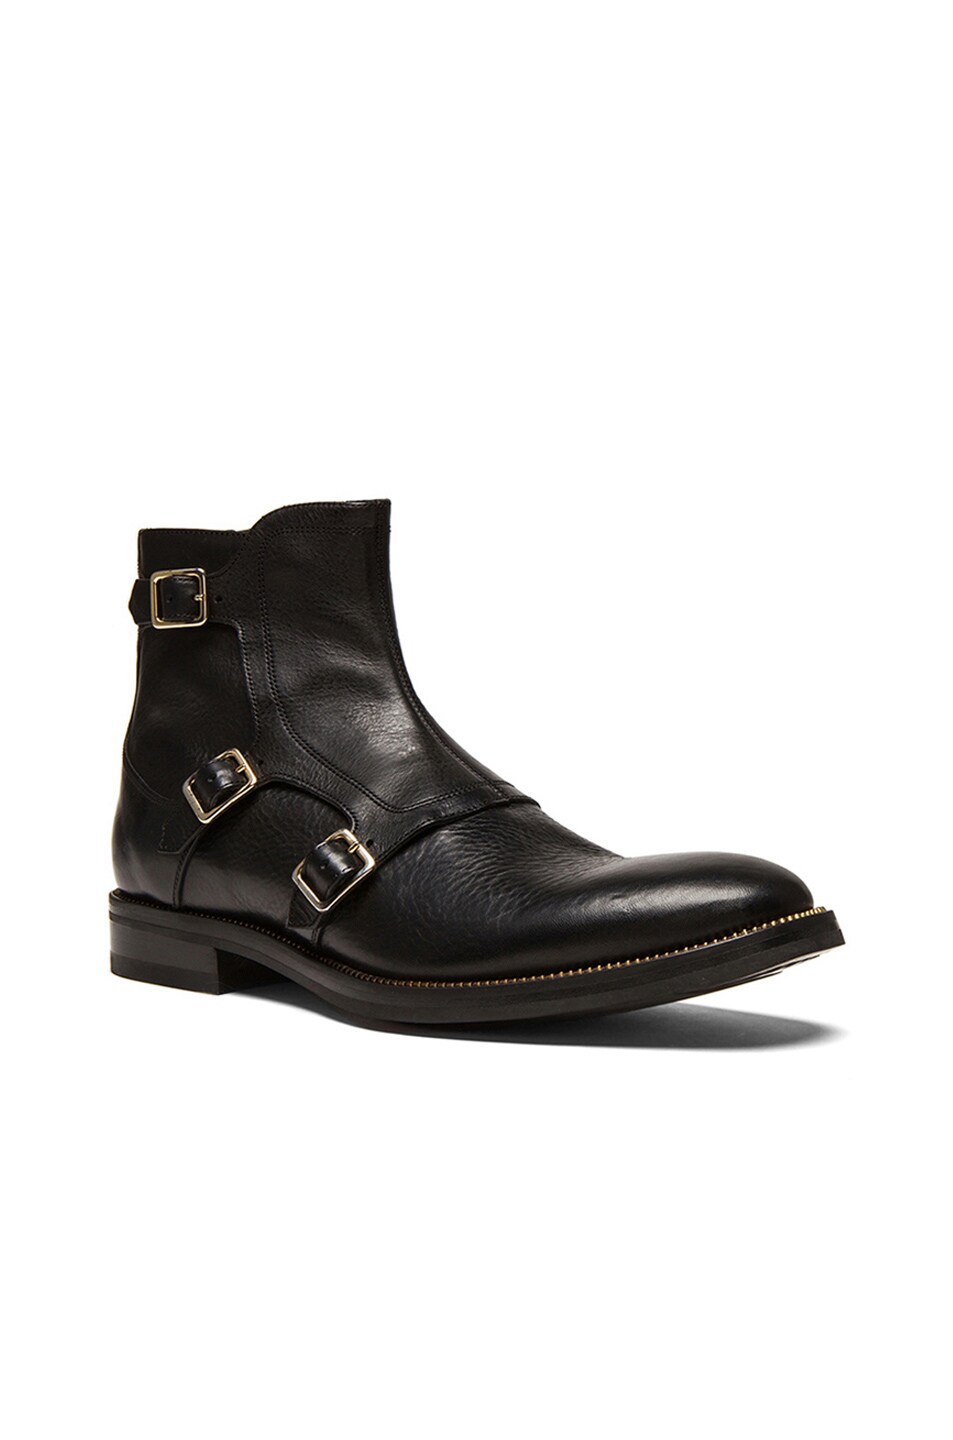 Image 1 of Alexander McQueen Three Buckle Leather Boots in Black & Gold